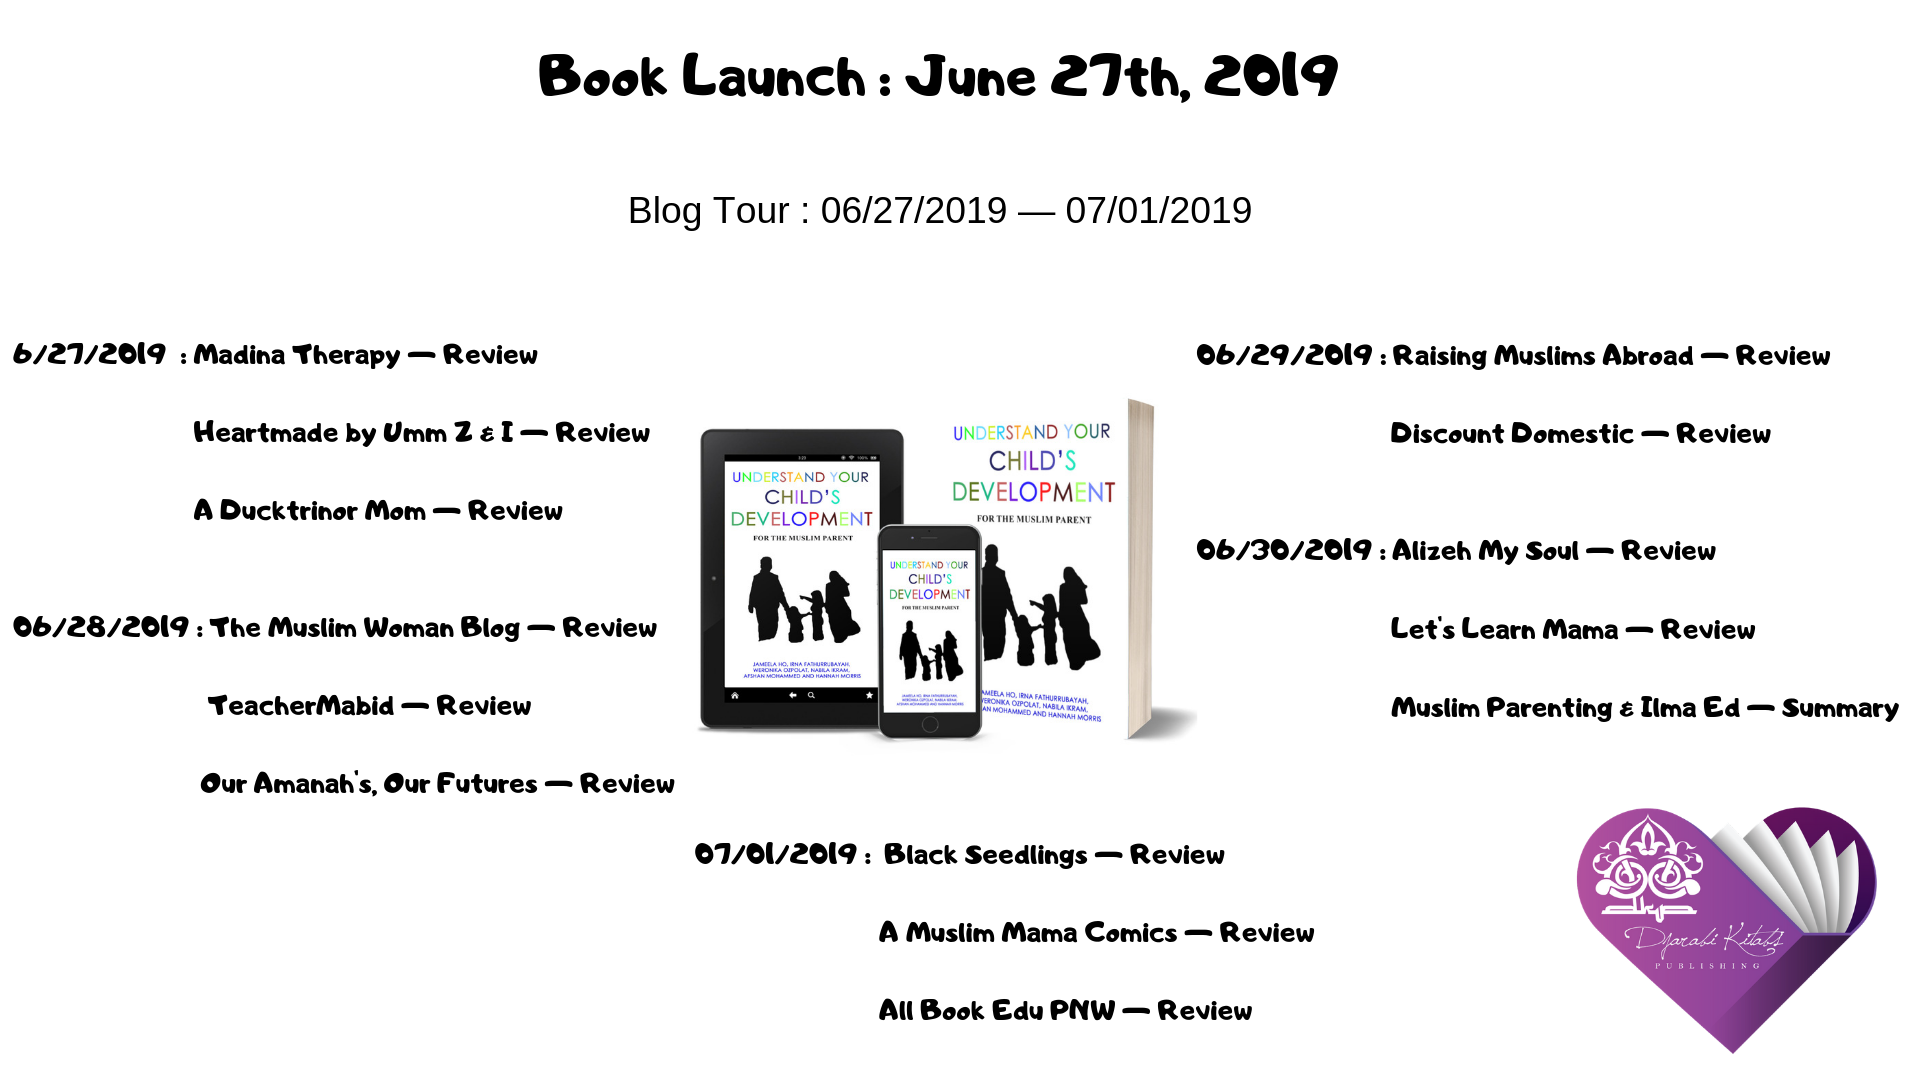 UYCD New Release! Book Launch and Blog Tour 6 26 19.png